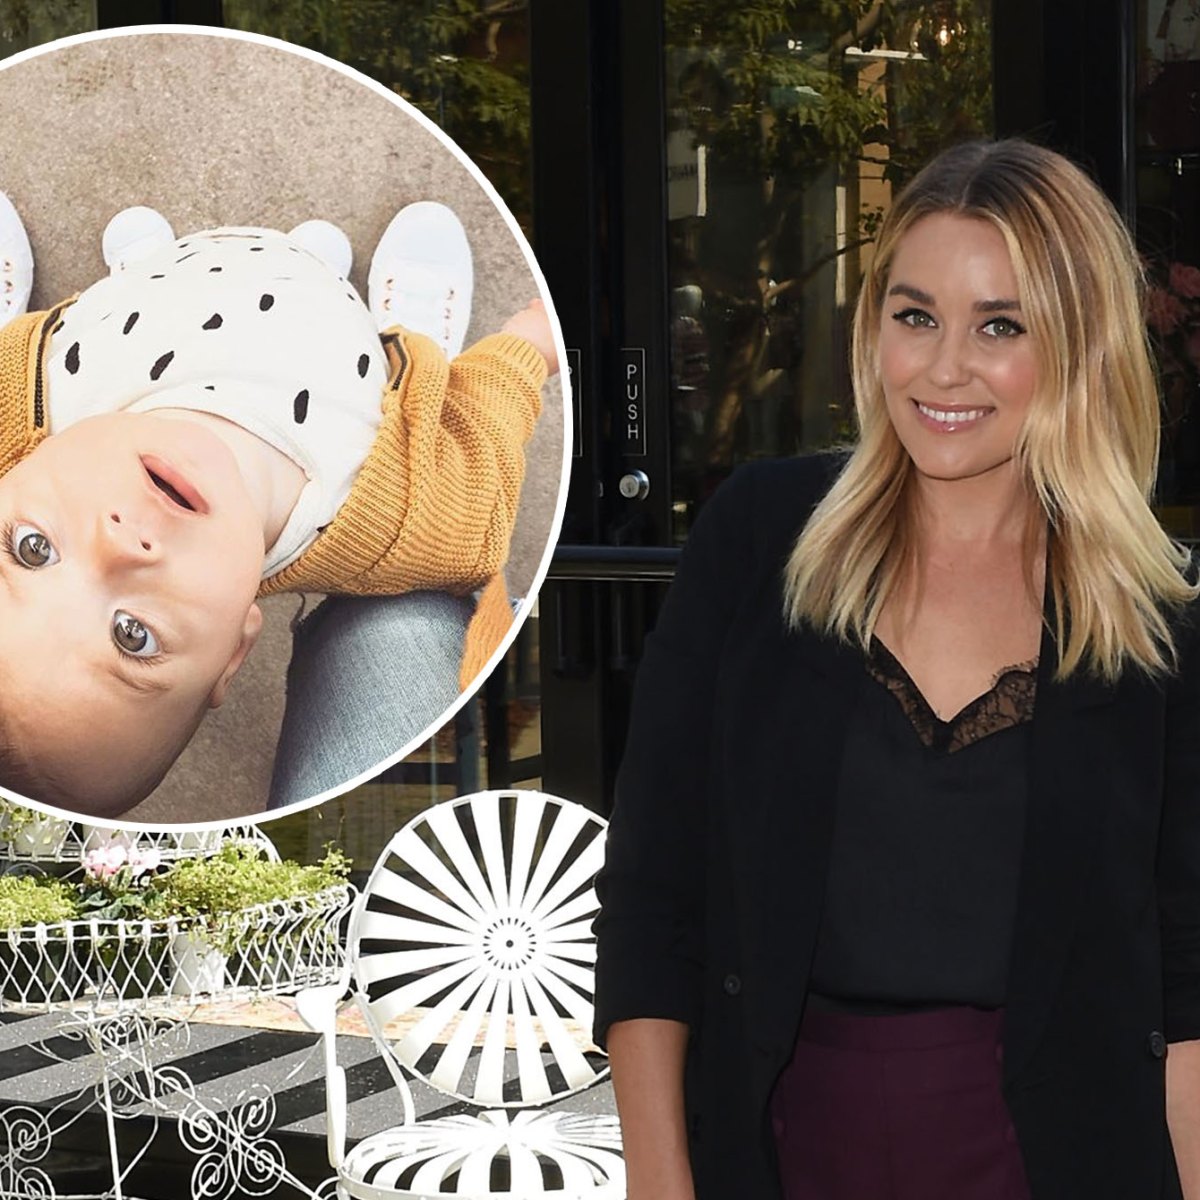 How Many Kids Does Lauren Conrad Have?